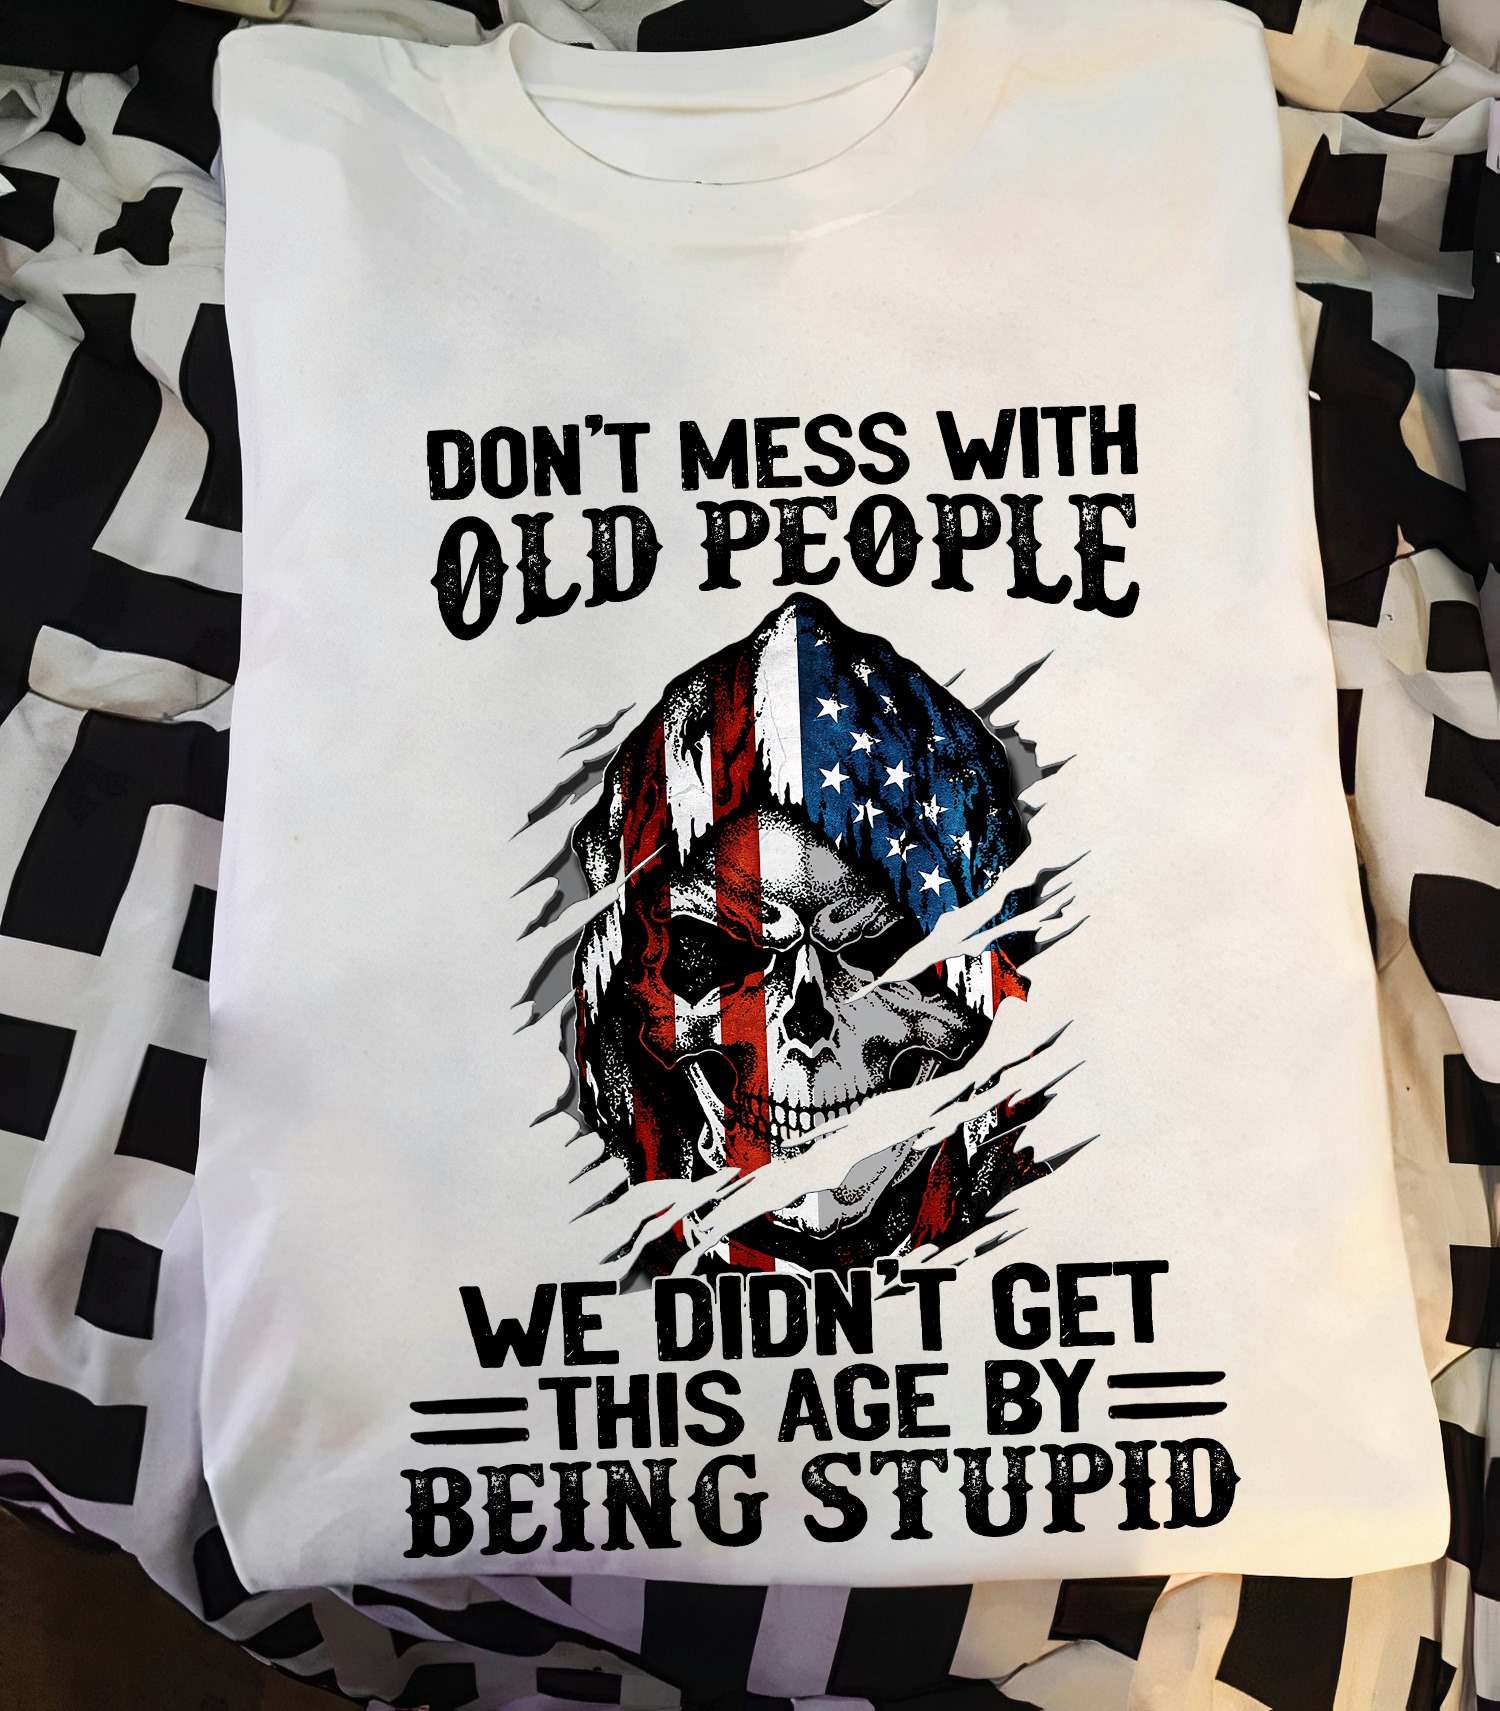 Don't mess with old people we didn't get this age by being stupid - Evil American